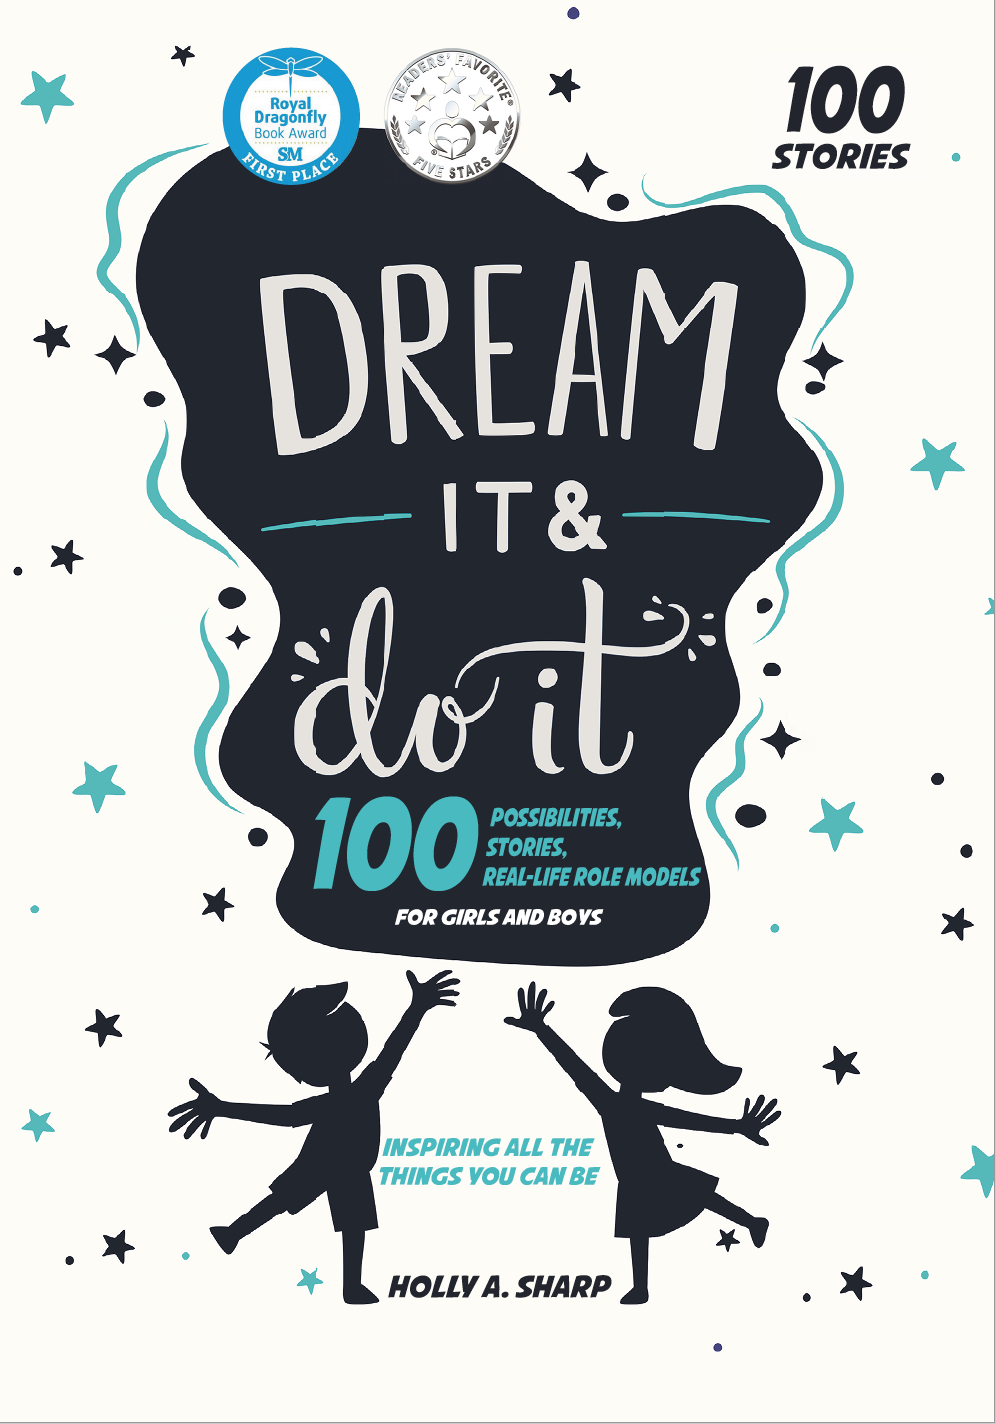 DREAM IT & DO IT by Holly Sharp